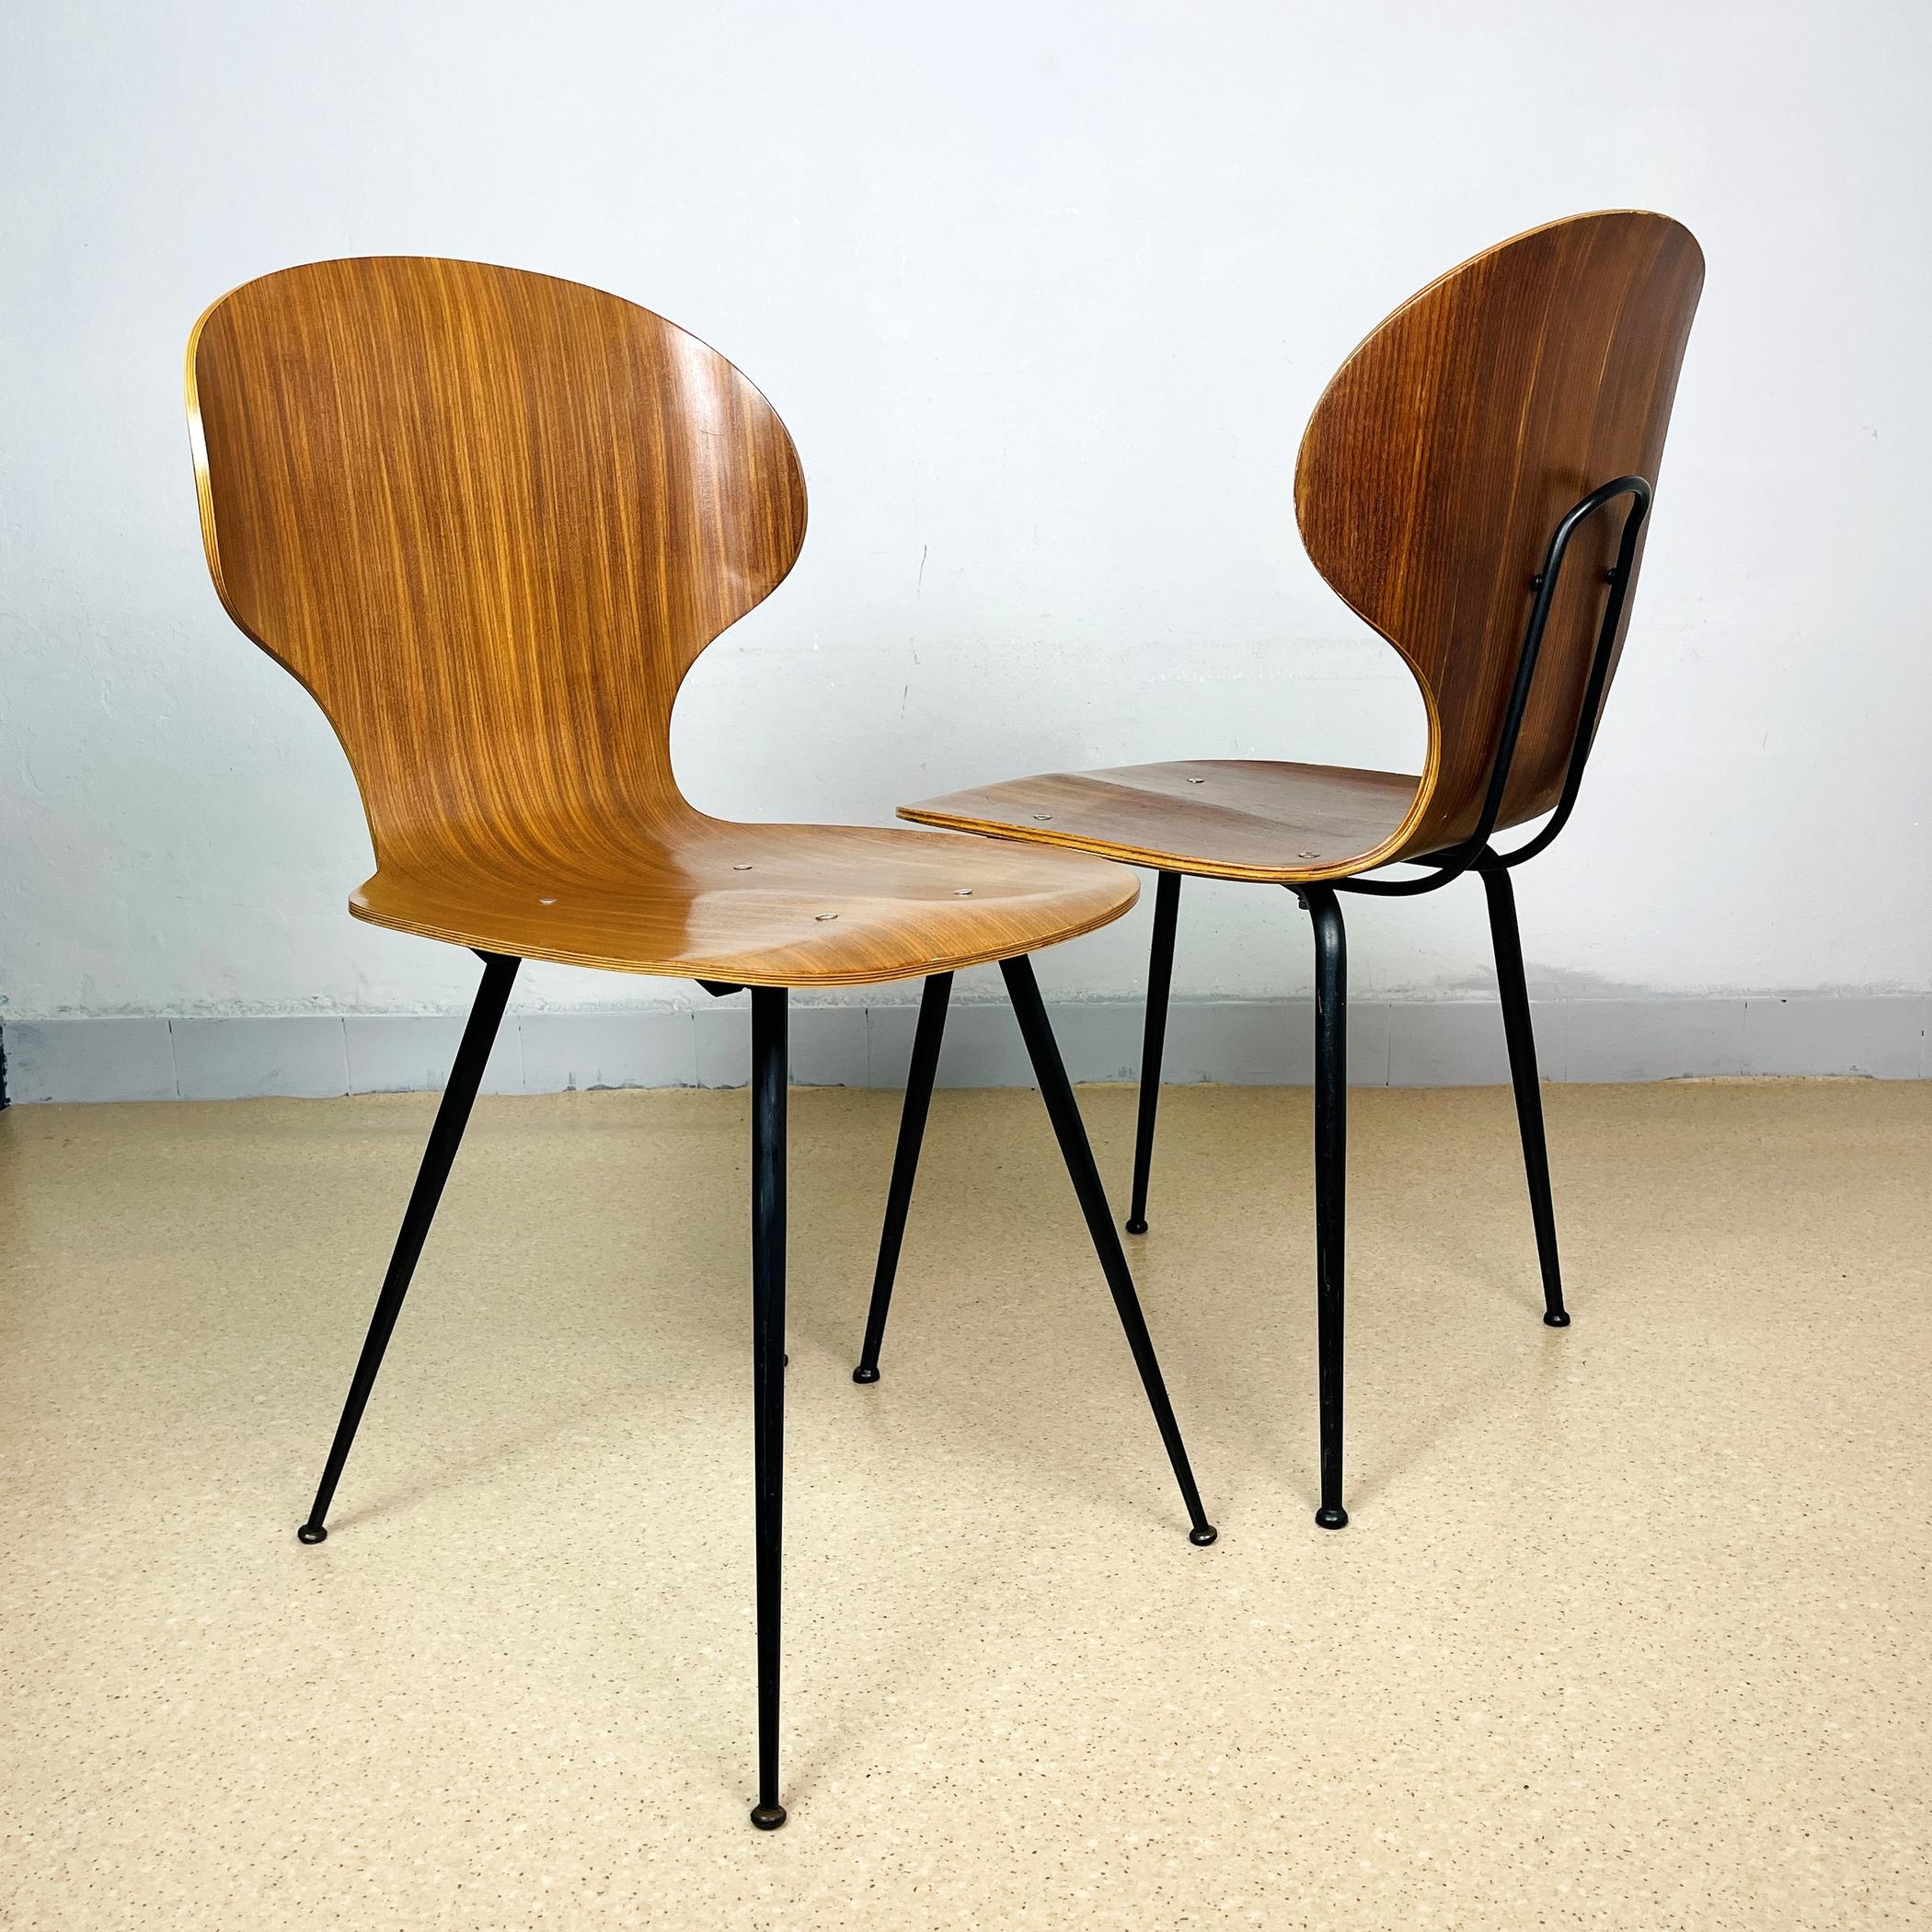 Mid-century dining chairs Lulli by Carlo Ratti for Industria Legni Curvati Lissone made in Italy in the 1970s. 
Shell in curved plywood, teak veneer, and particular legs in black painted iron. The chair was designed by Carlo Ratti in 1958.
The